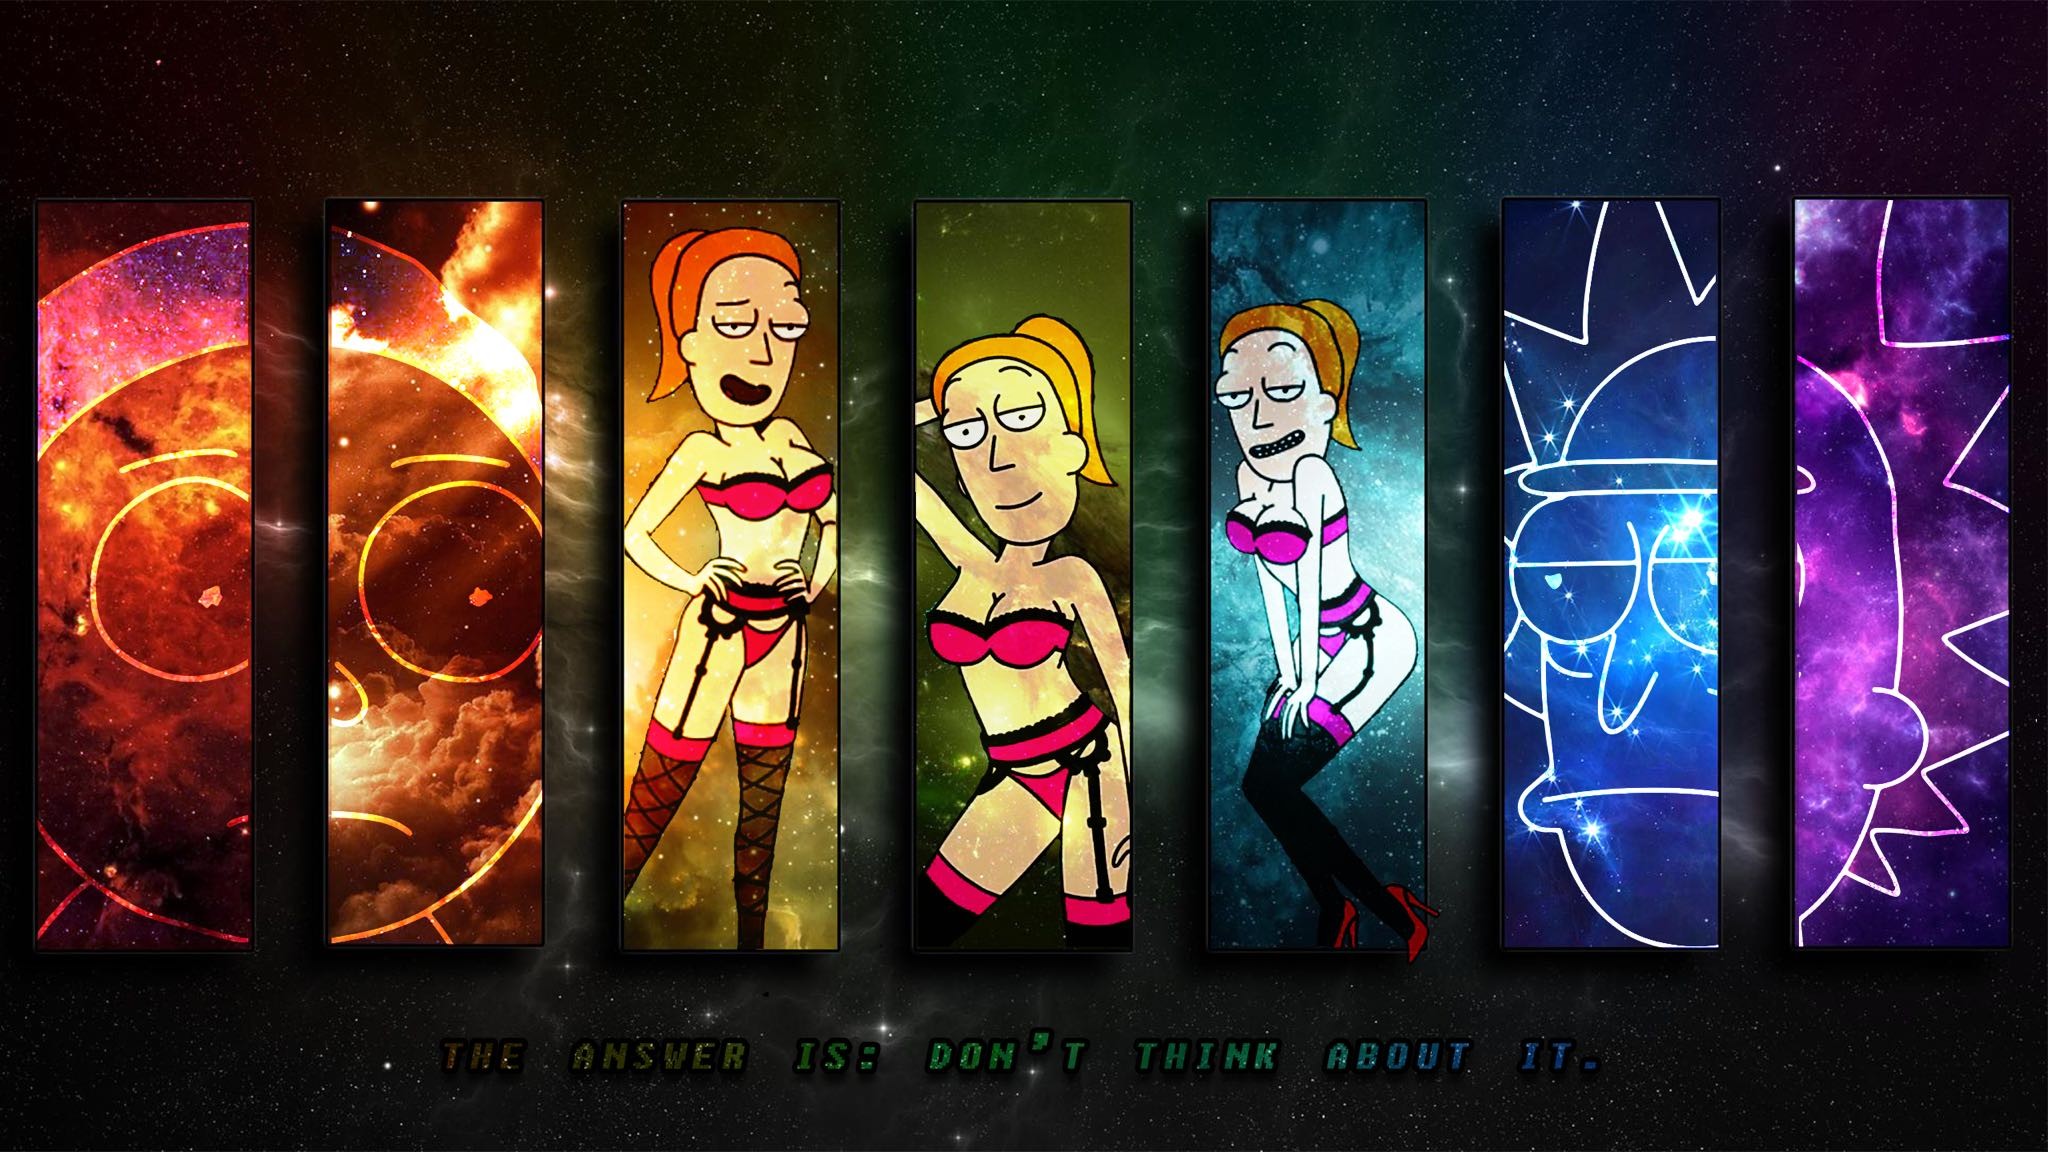 General 2048x1152 Rick and Morty collage digital art lingerie typography Summer Smith Morty Smith Rick Sanchez cartoon TV series fan art